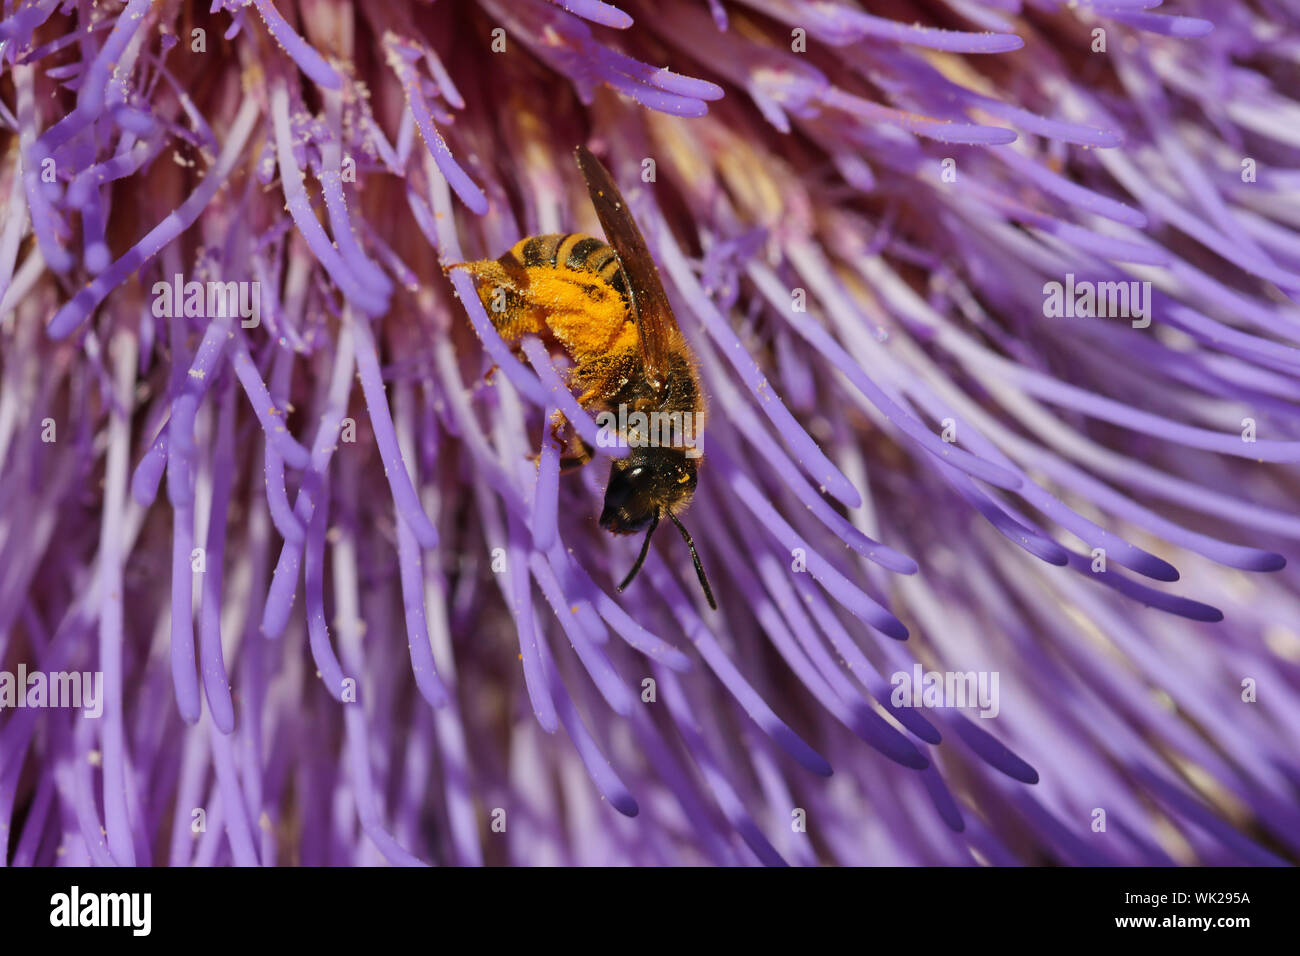 honey bee Latin apis mellifera covered in pollen feeding on a flowering globe or French or green artichoke plant  Latin cynara cardunculus or scolymus Stock Photo